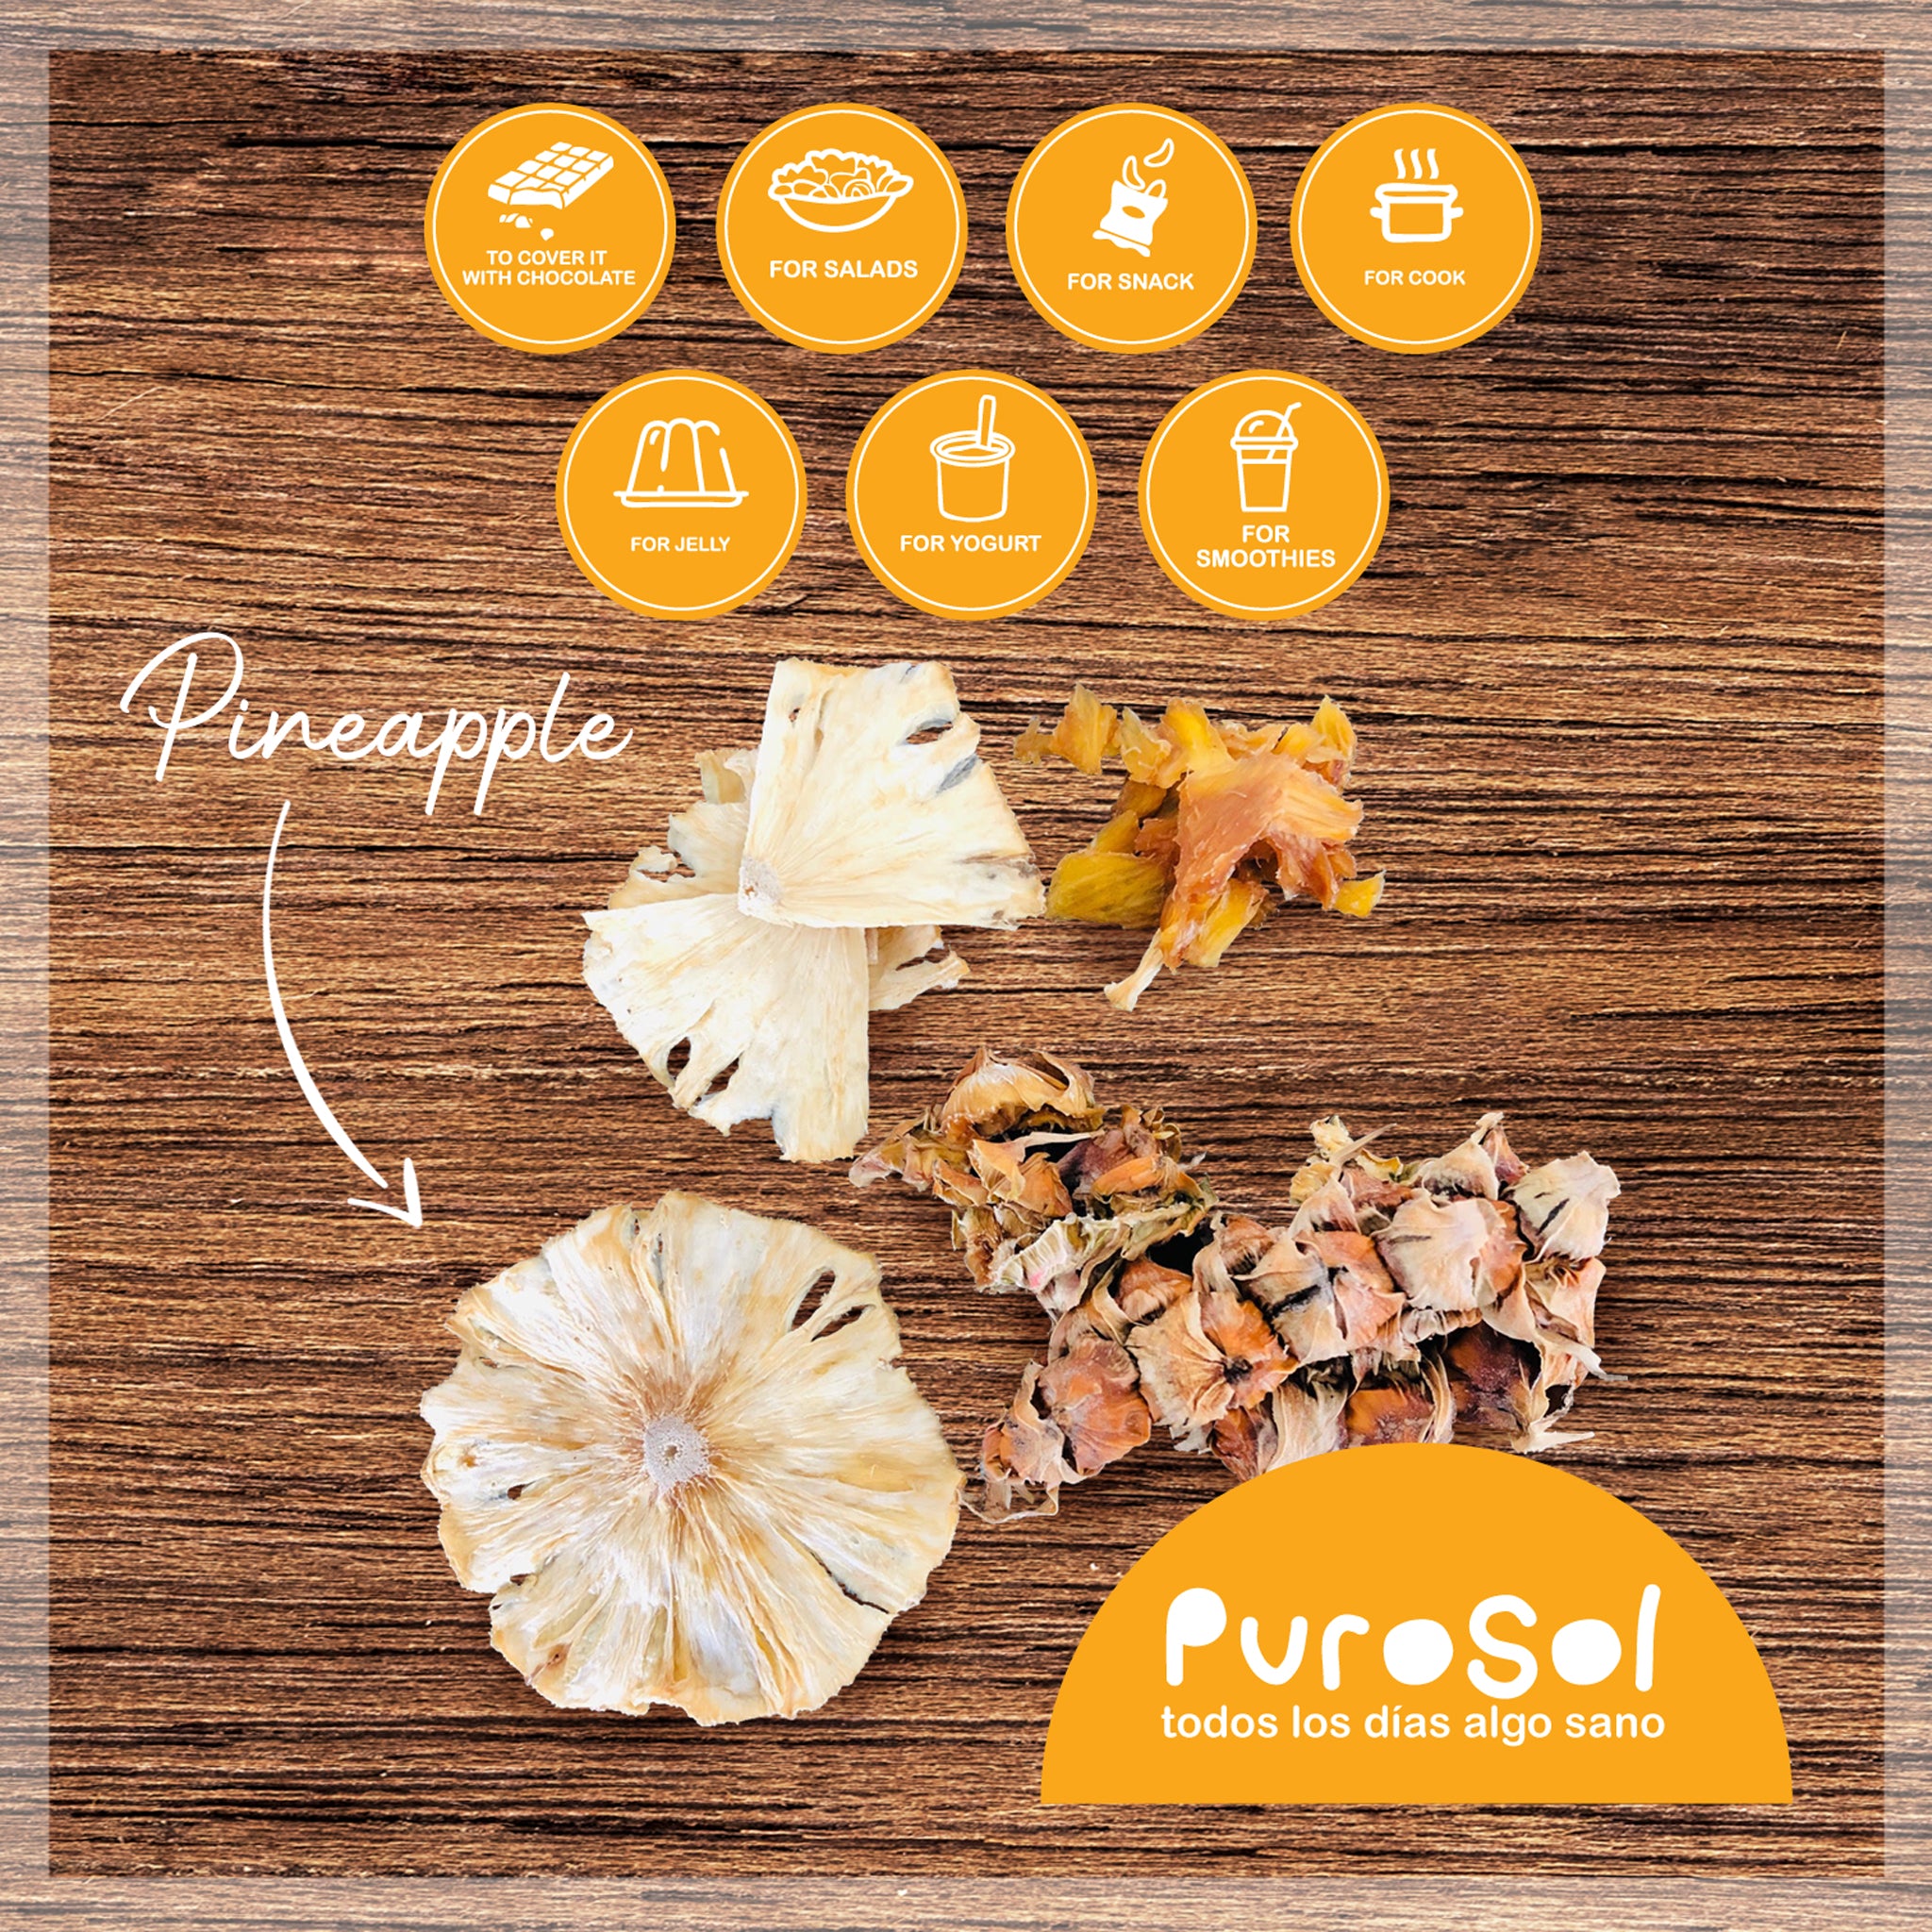 Sun Dried Sliced Pineapple with Peel by PuroSol (217 gr.)-healthy snacks sun-dried in Guatemala, dehydrated fruits and herbs for all of your culinary creations